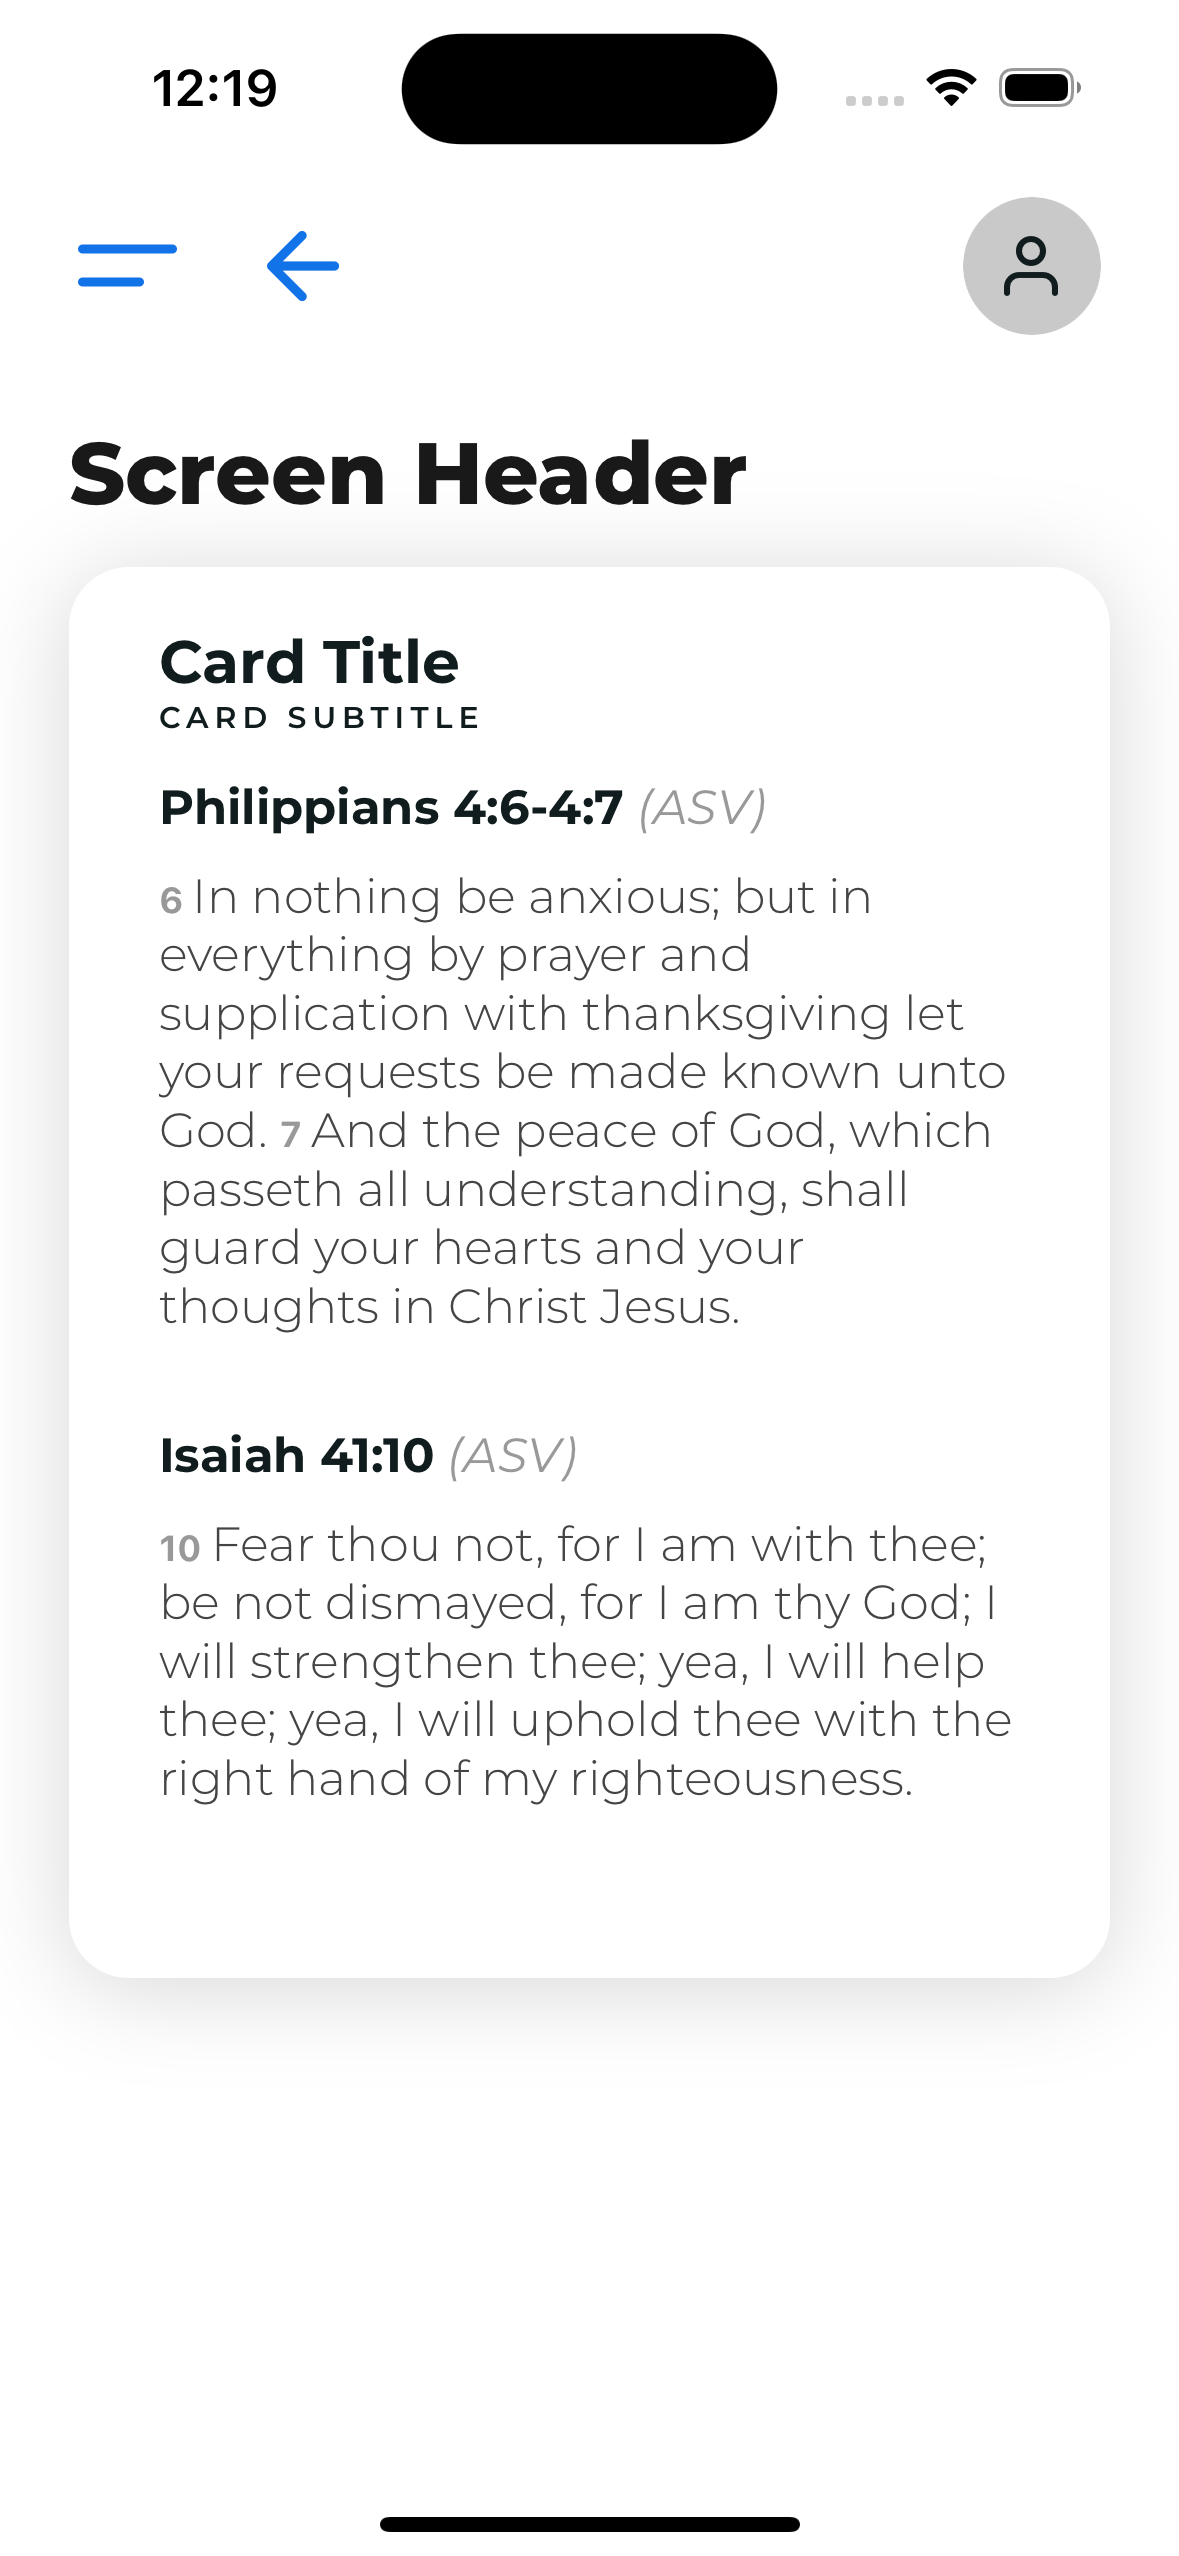 Image displaying Phillippians 4:6-4:7 with the verse title in bold and the verse not bolded, followed by the same format for Isaiah 41:10.